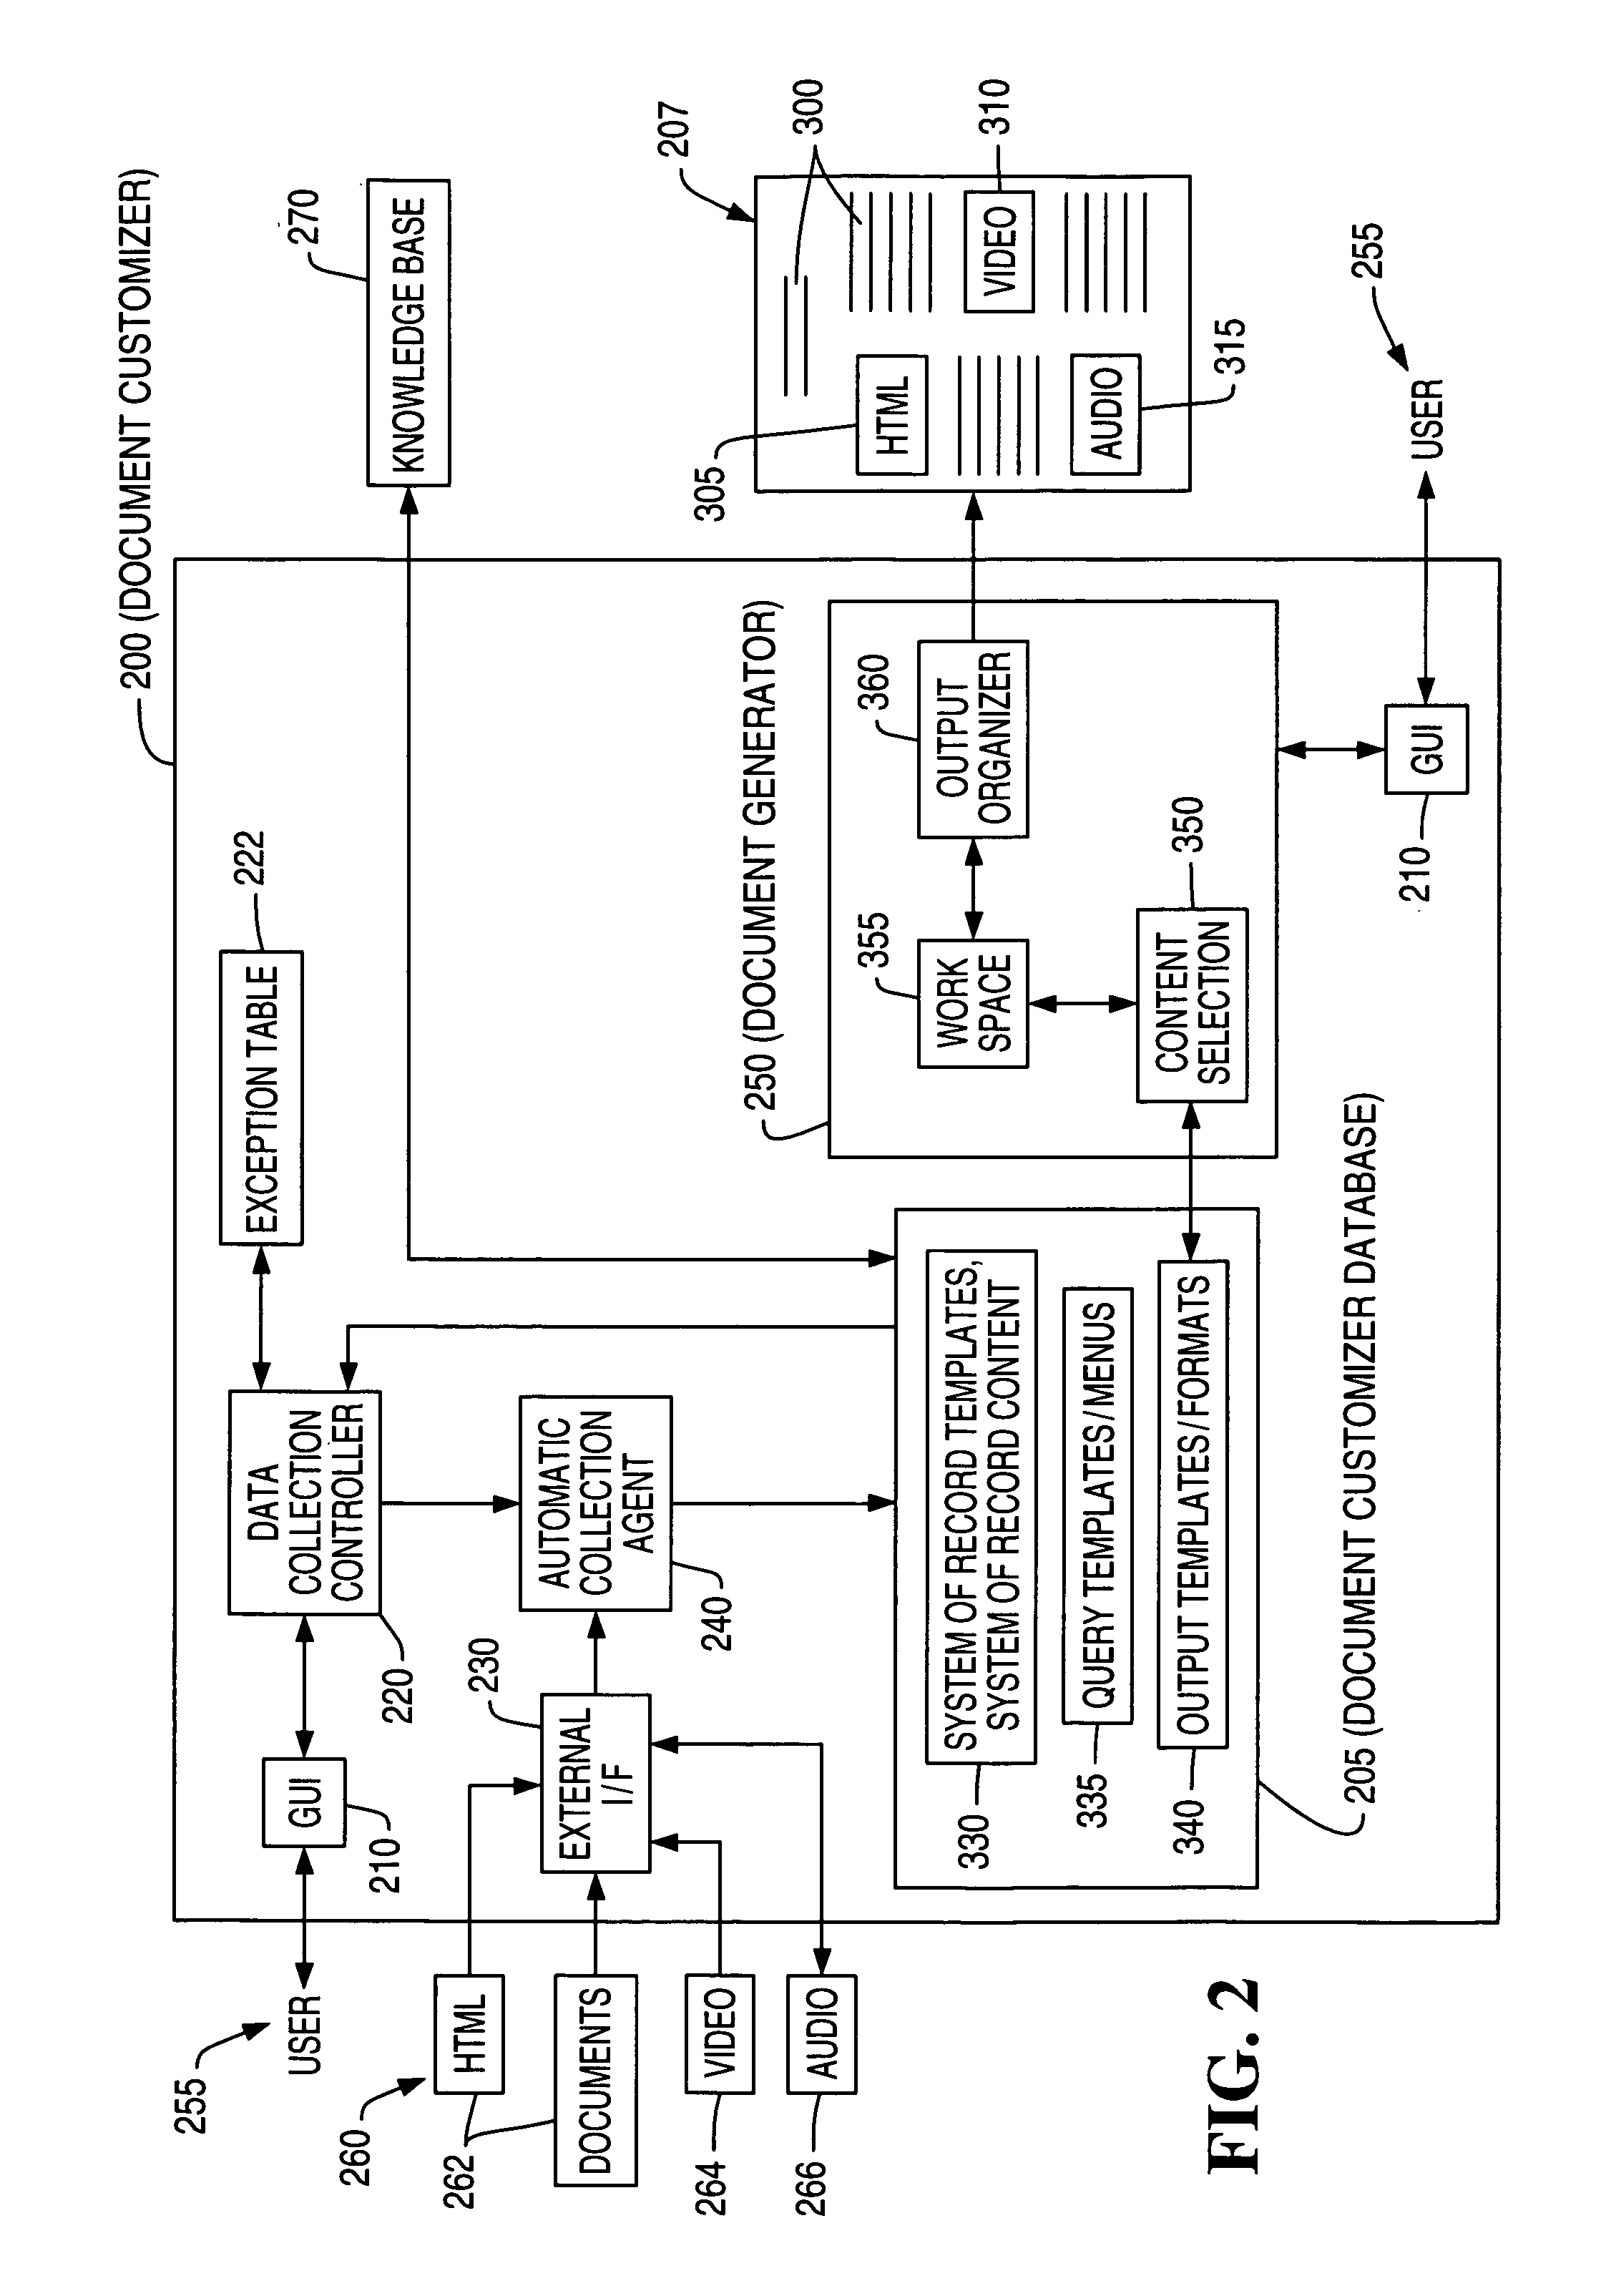 Method of generating user customized document incorporating at least a portion of discovery information recorded in the system of record database in data warehouse environment